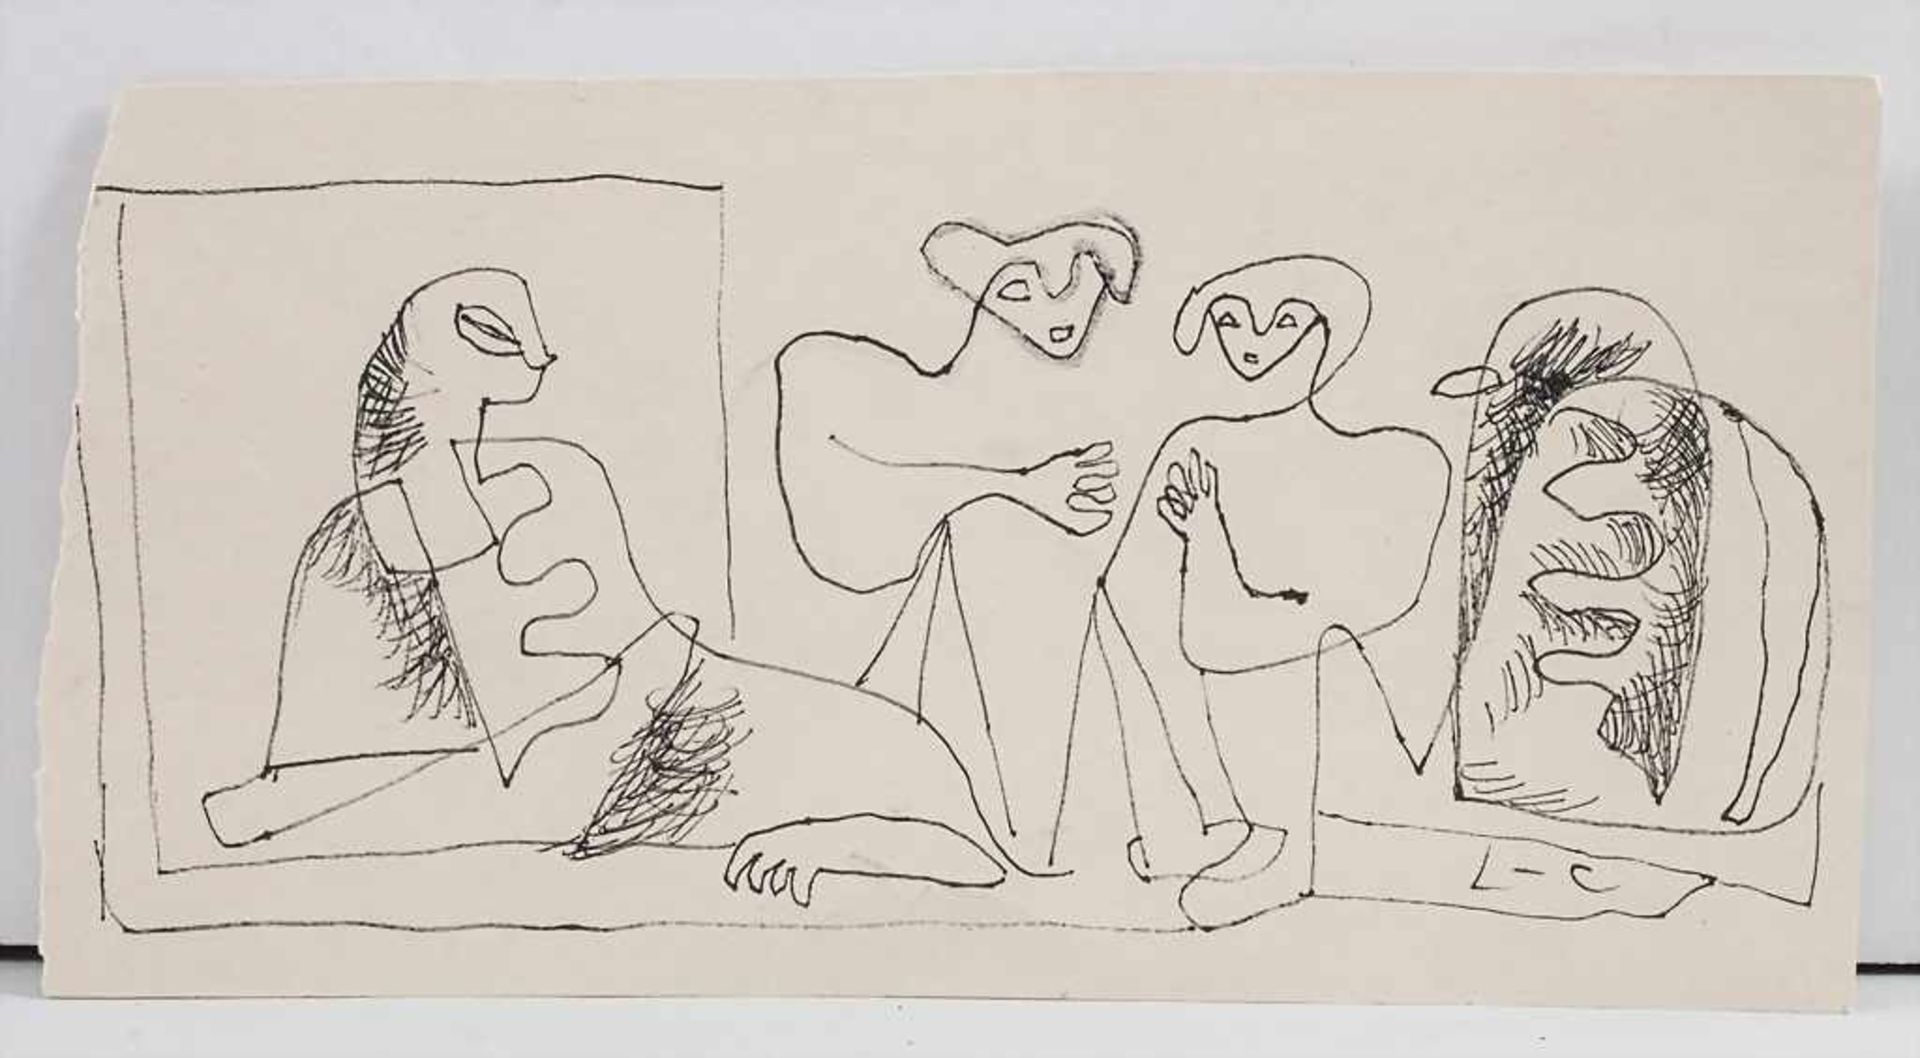 Le Corbusier (1887-1965) (Zuschreibung / Attributed), 'Figurengruppe' / 'A figural group' - Image 3 of 3